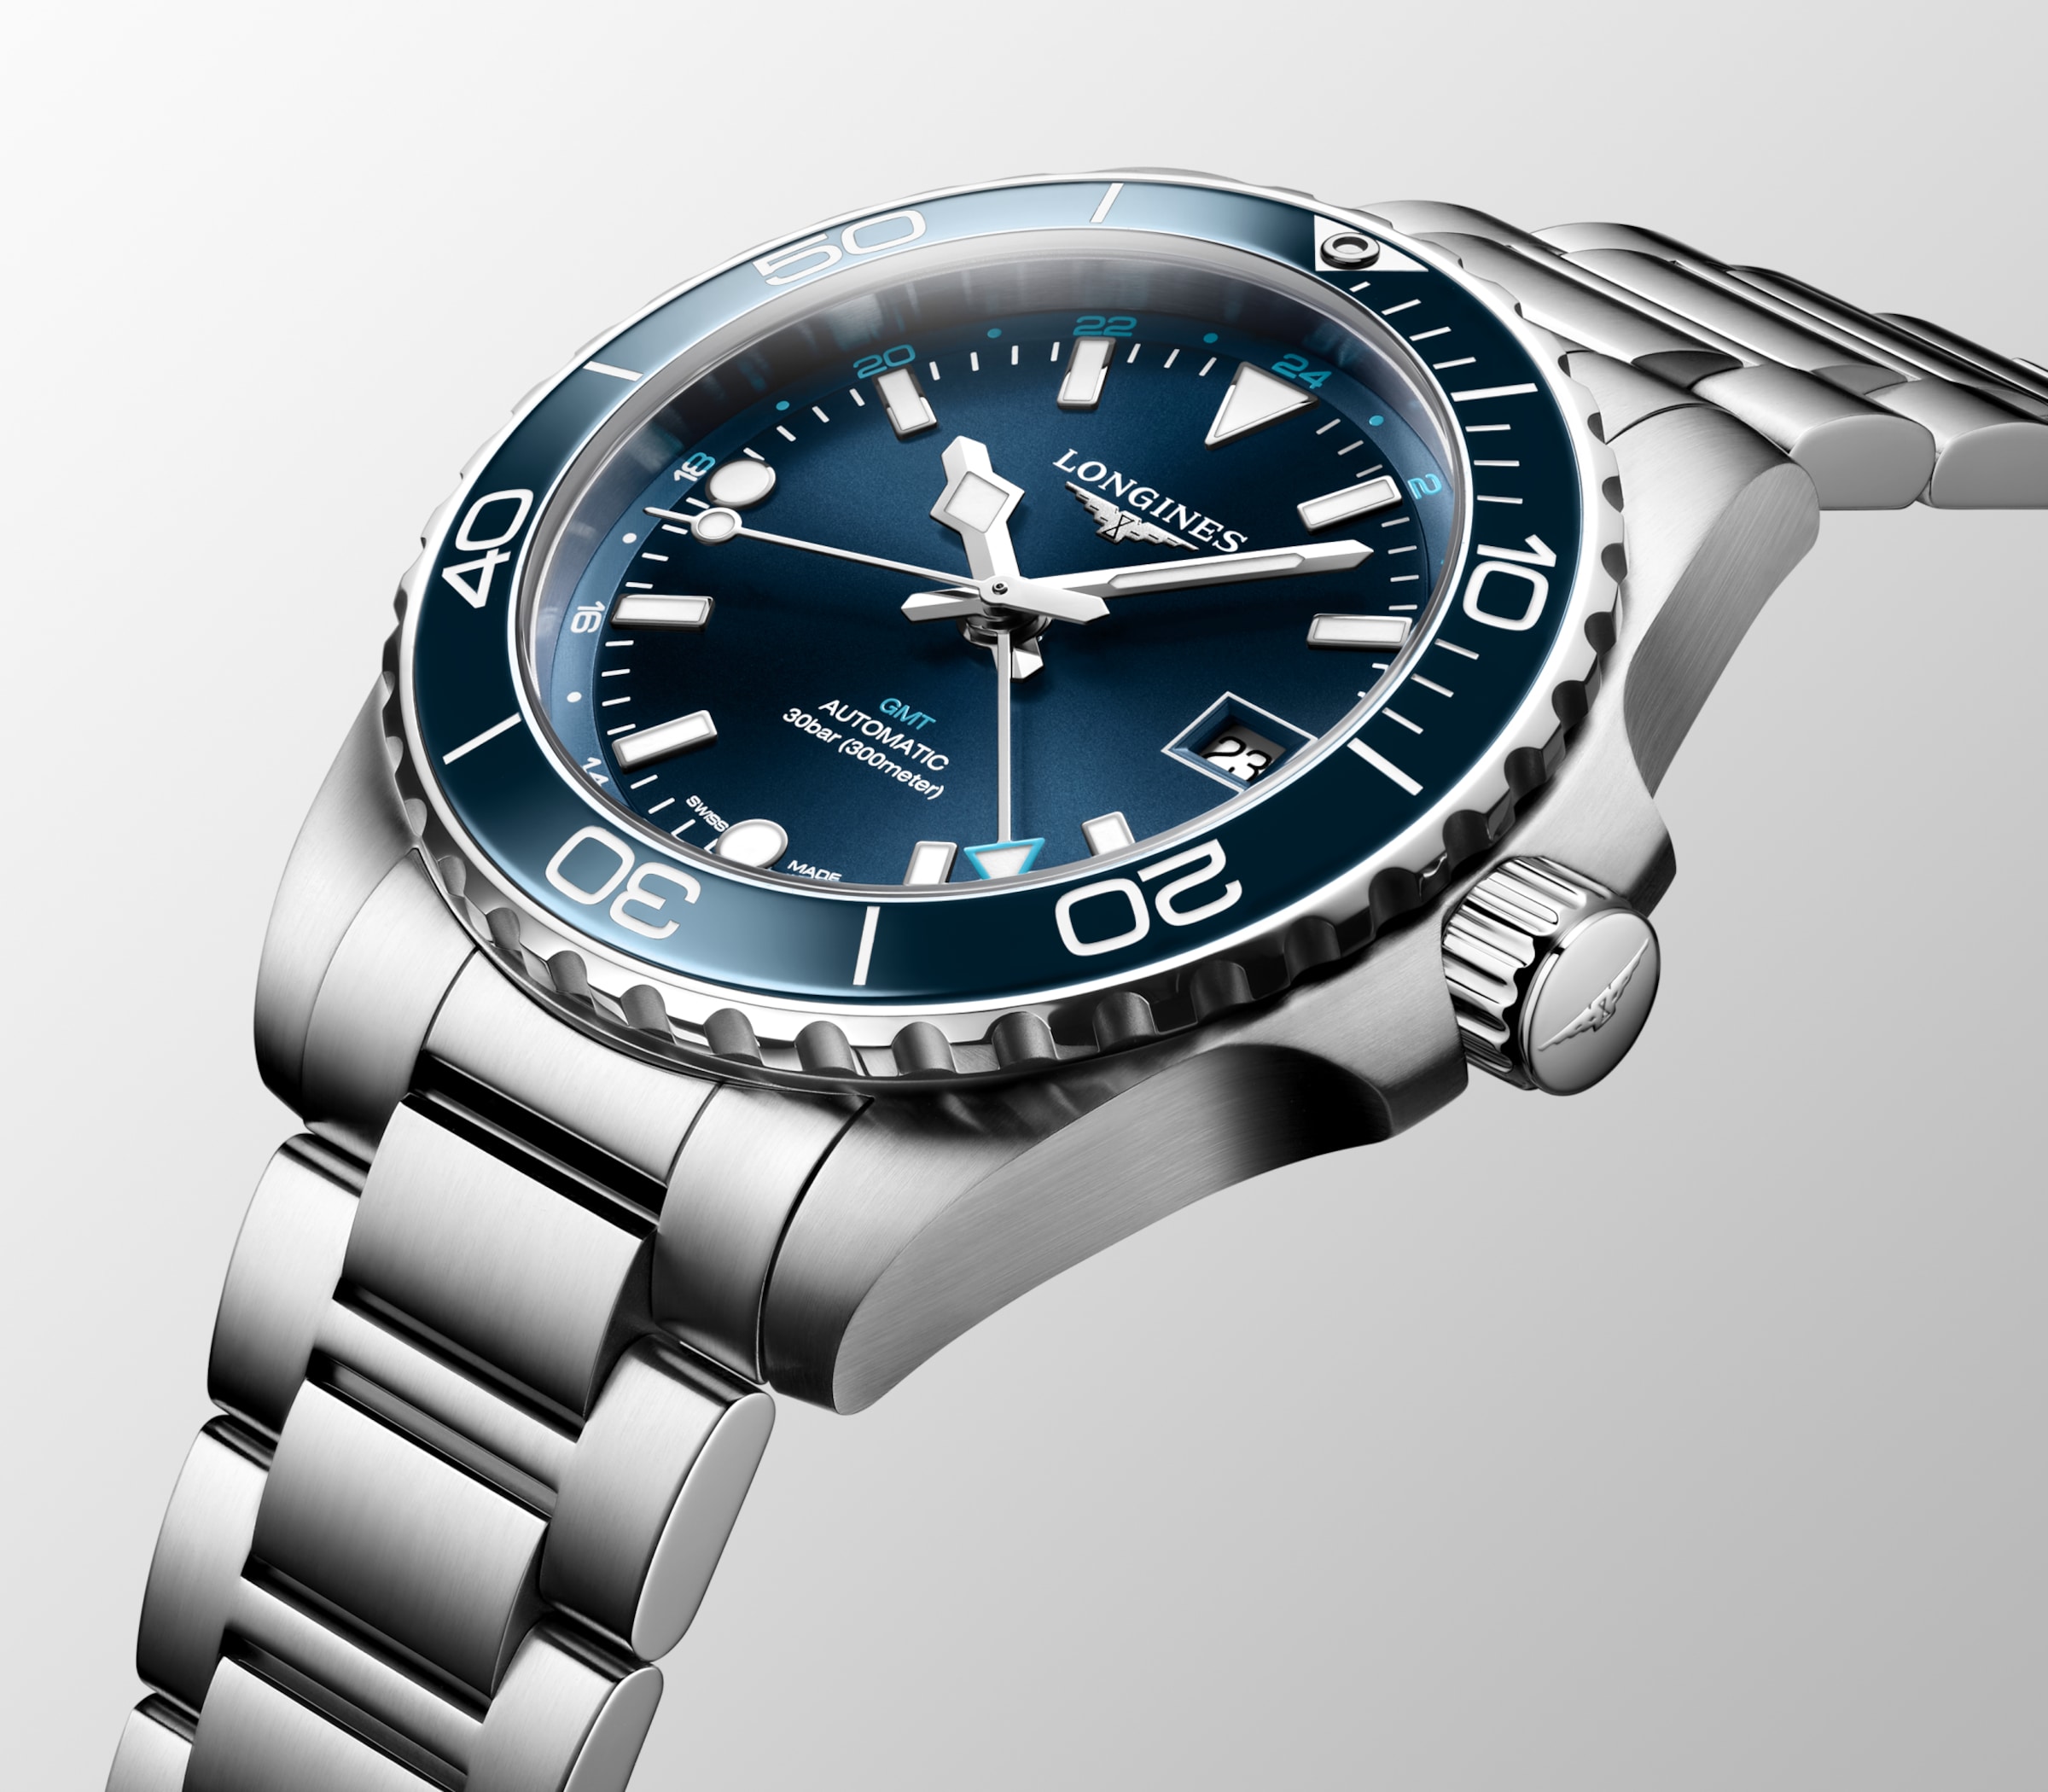 Longines HYDROCONQUEST Automatic Stainless steel and ceramic bezel Watch - L3.790.4.96.6